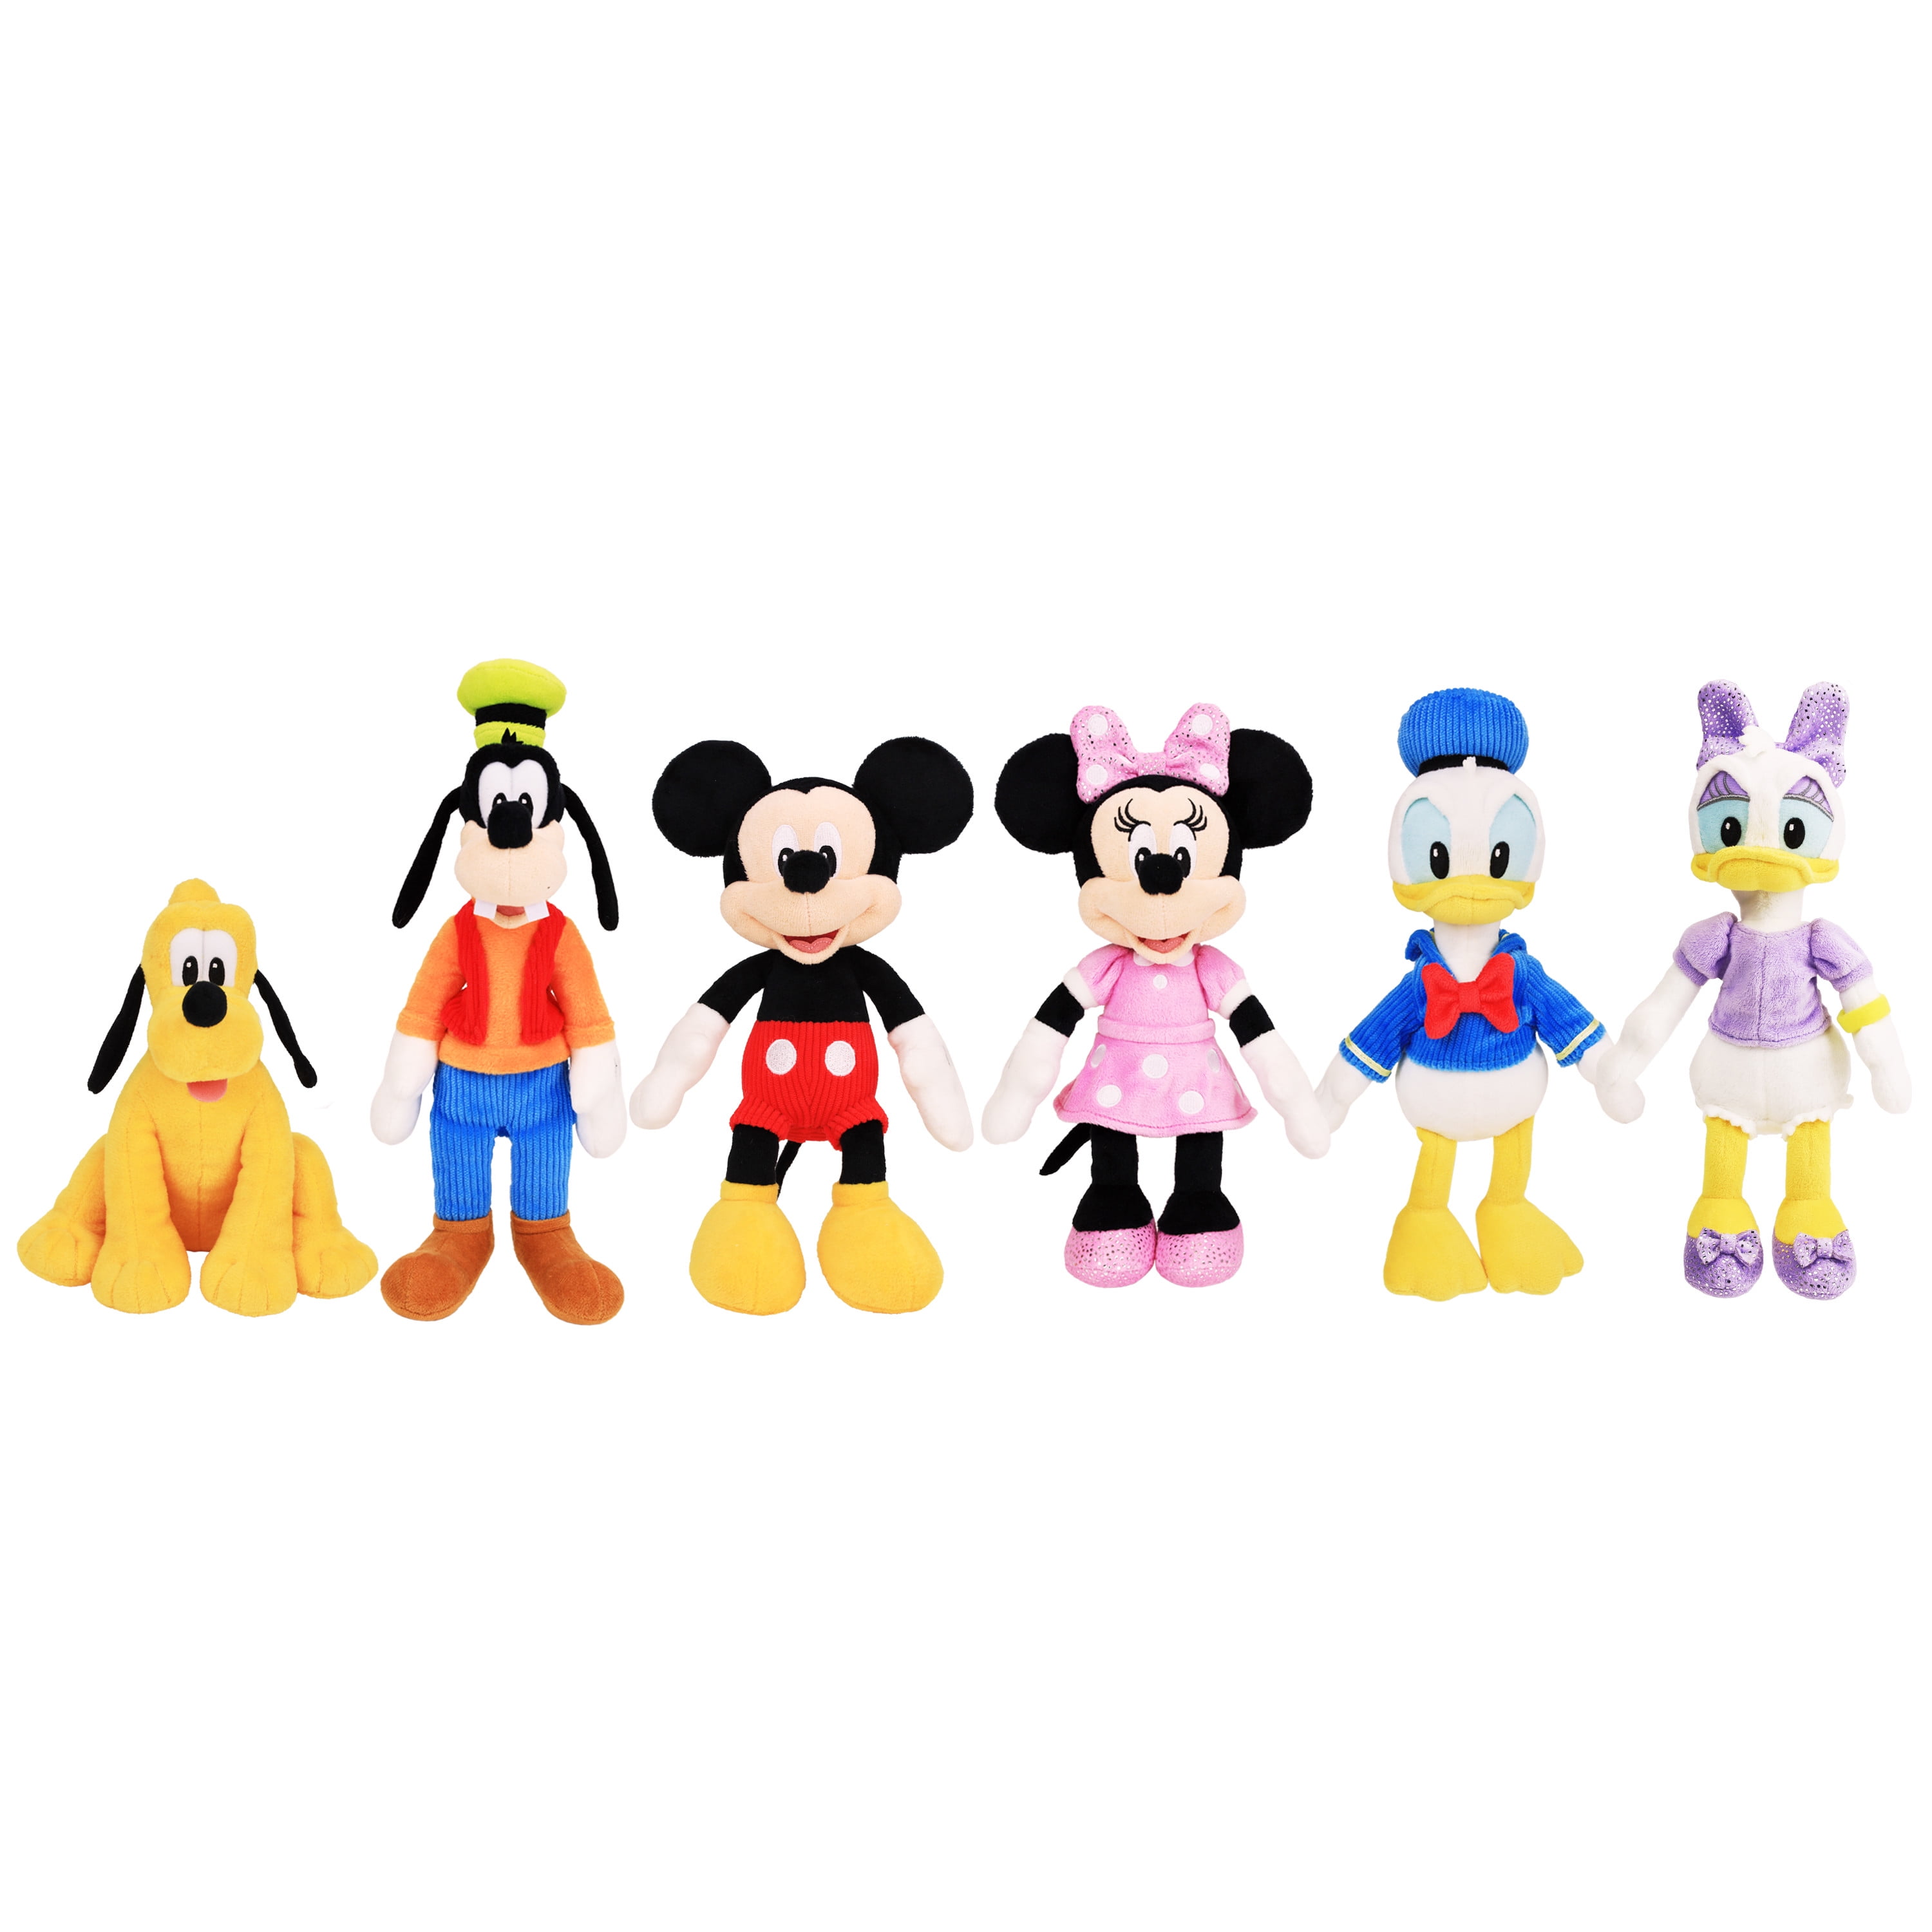 Disney Baby Musical Discovery Plush Mickey Mouse, Officially Licensed Kids  Toys for Ages 06 Month, Gifts and Presents - Walmart.com